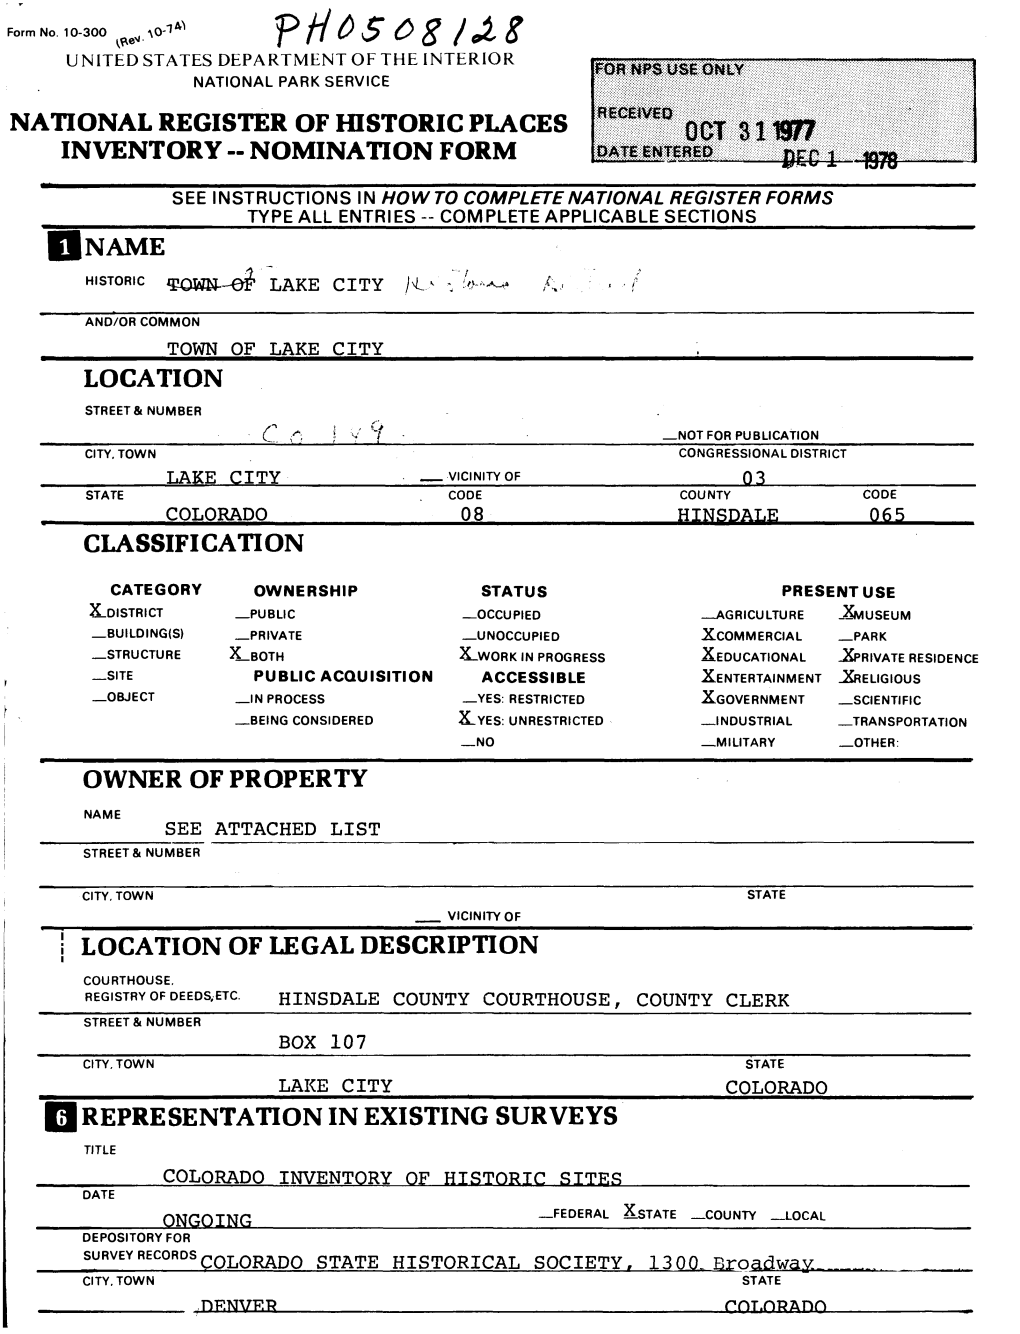 Nomination Form Location Owner of Property